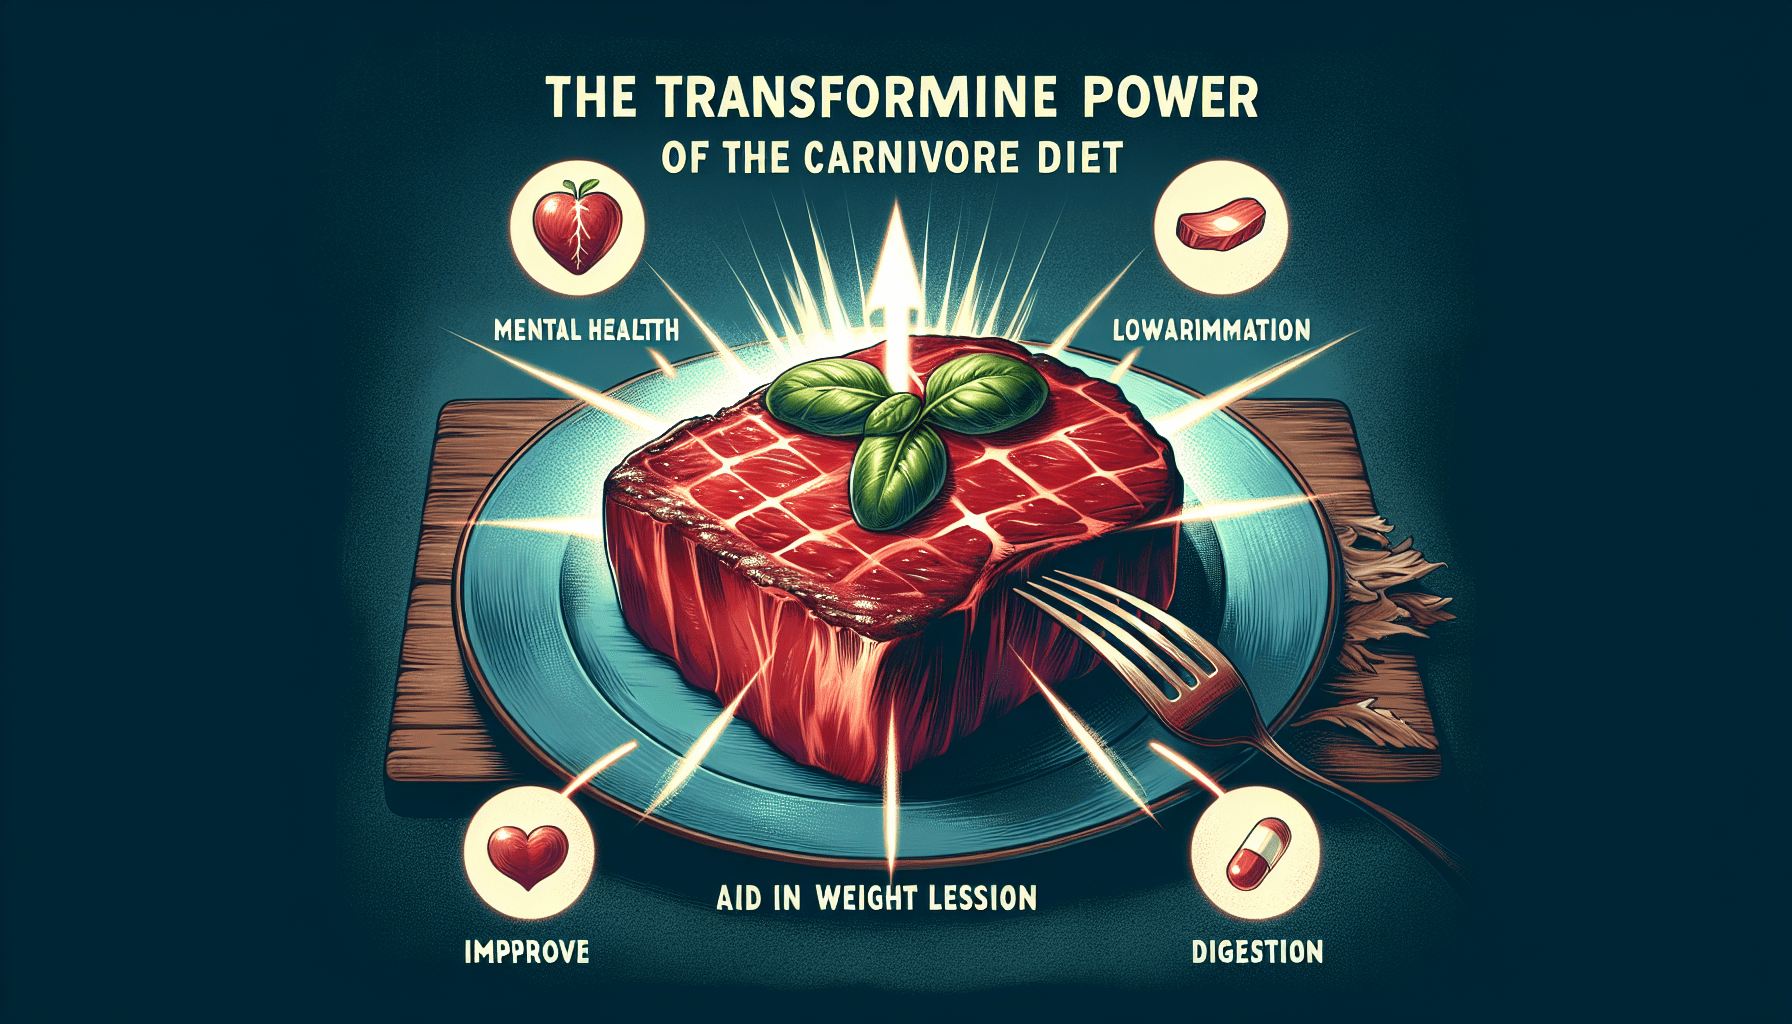 Unlocking Mental Health and Wellbeing through the Carnivore Diet